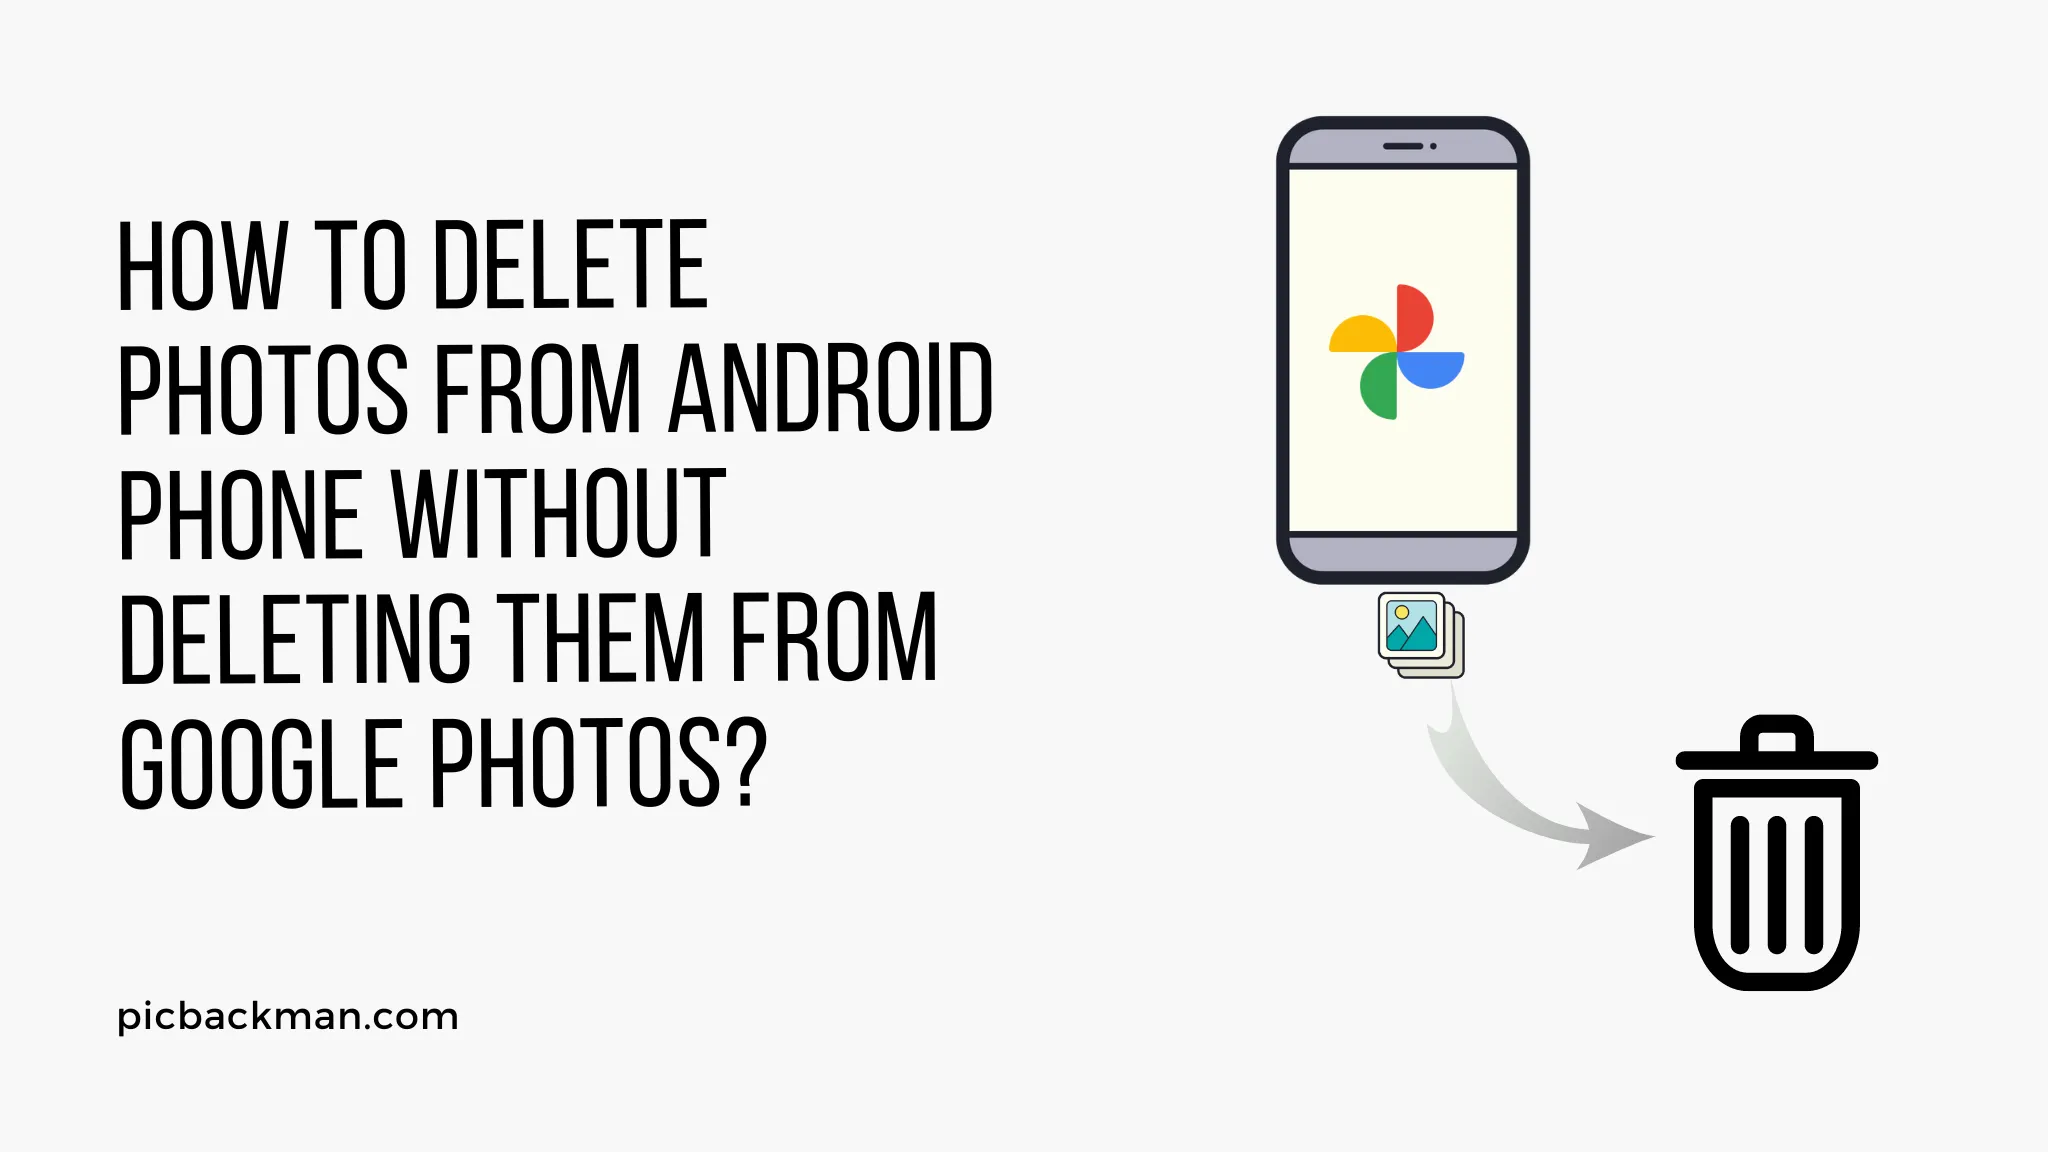 How to Delete Photos from Android Phone without Deleting them from Google Photos